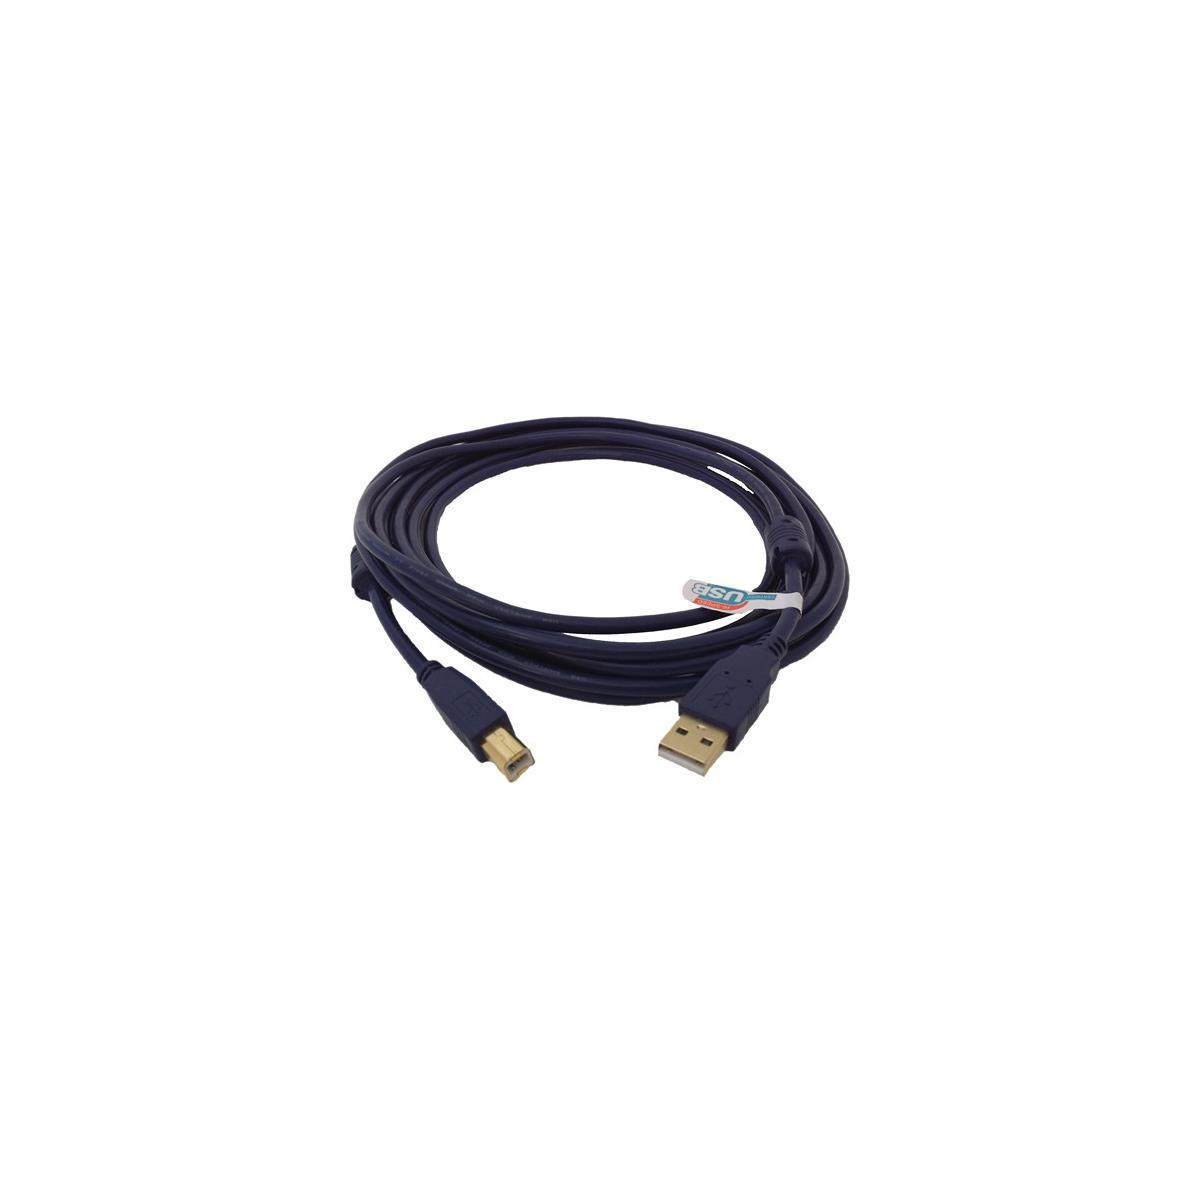 Image of HoverCam USB 2.0 30' Extension Cable